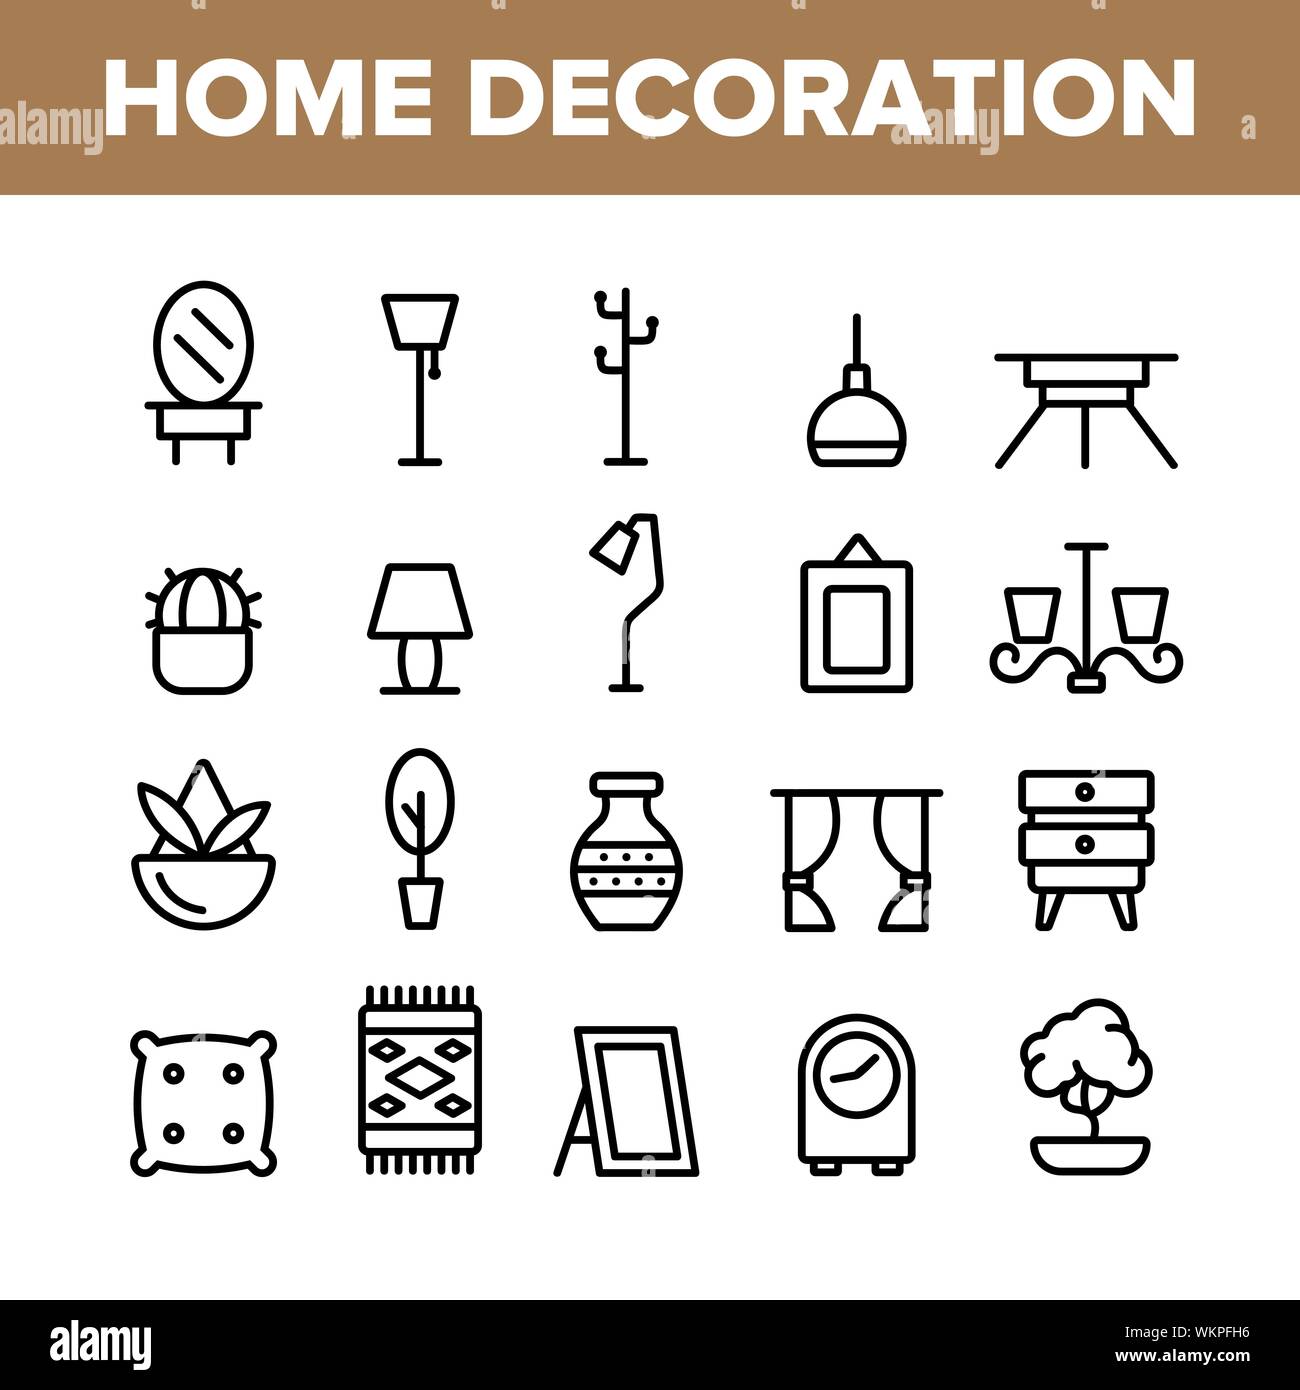 Collection Home Decoration Items Vector Icons Set Stock Vector ...